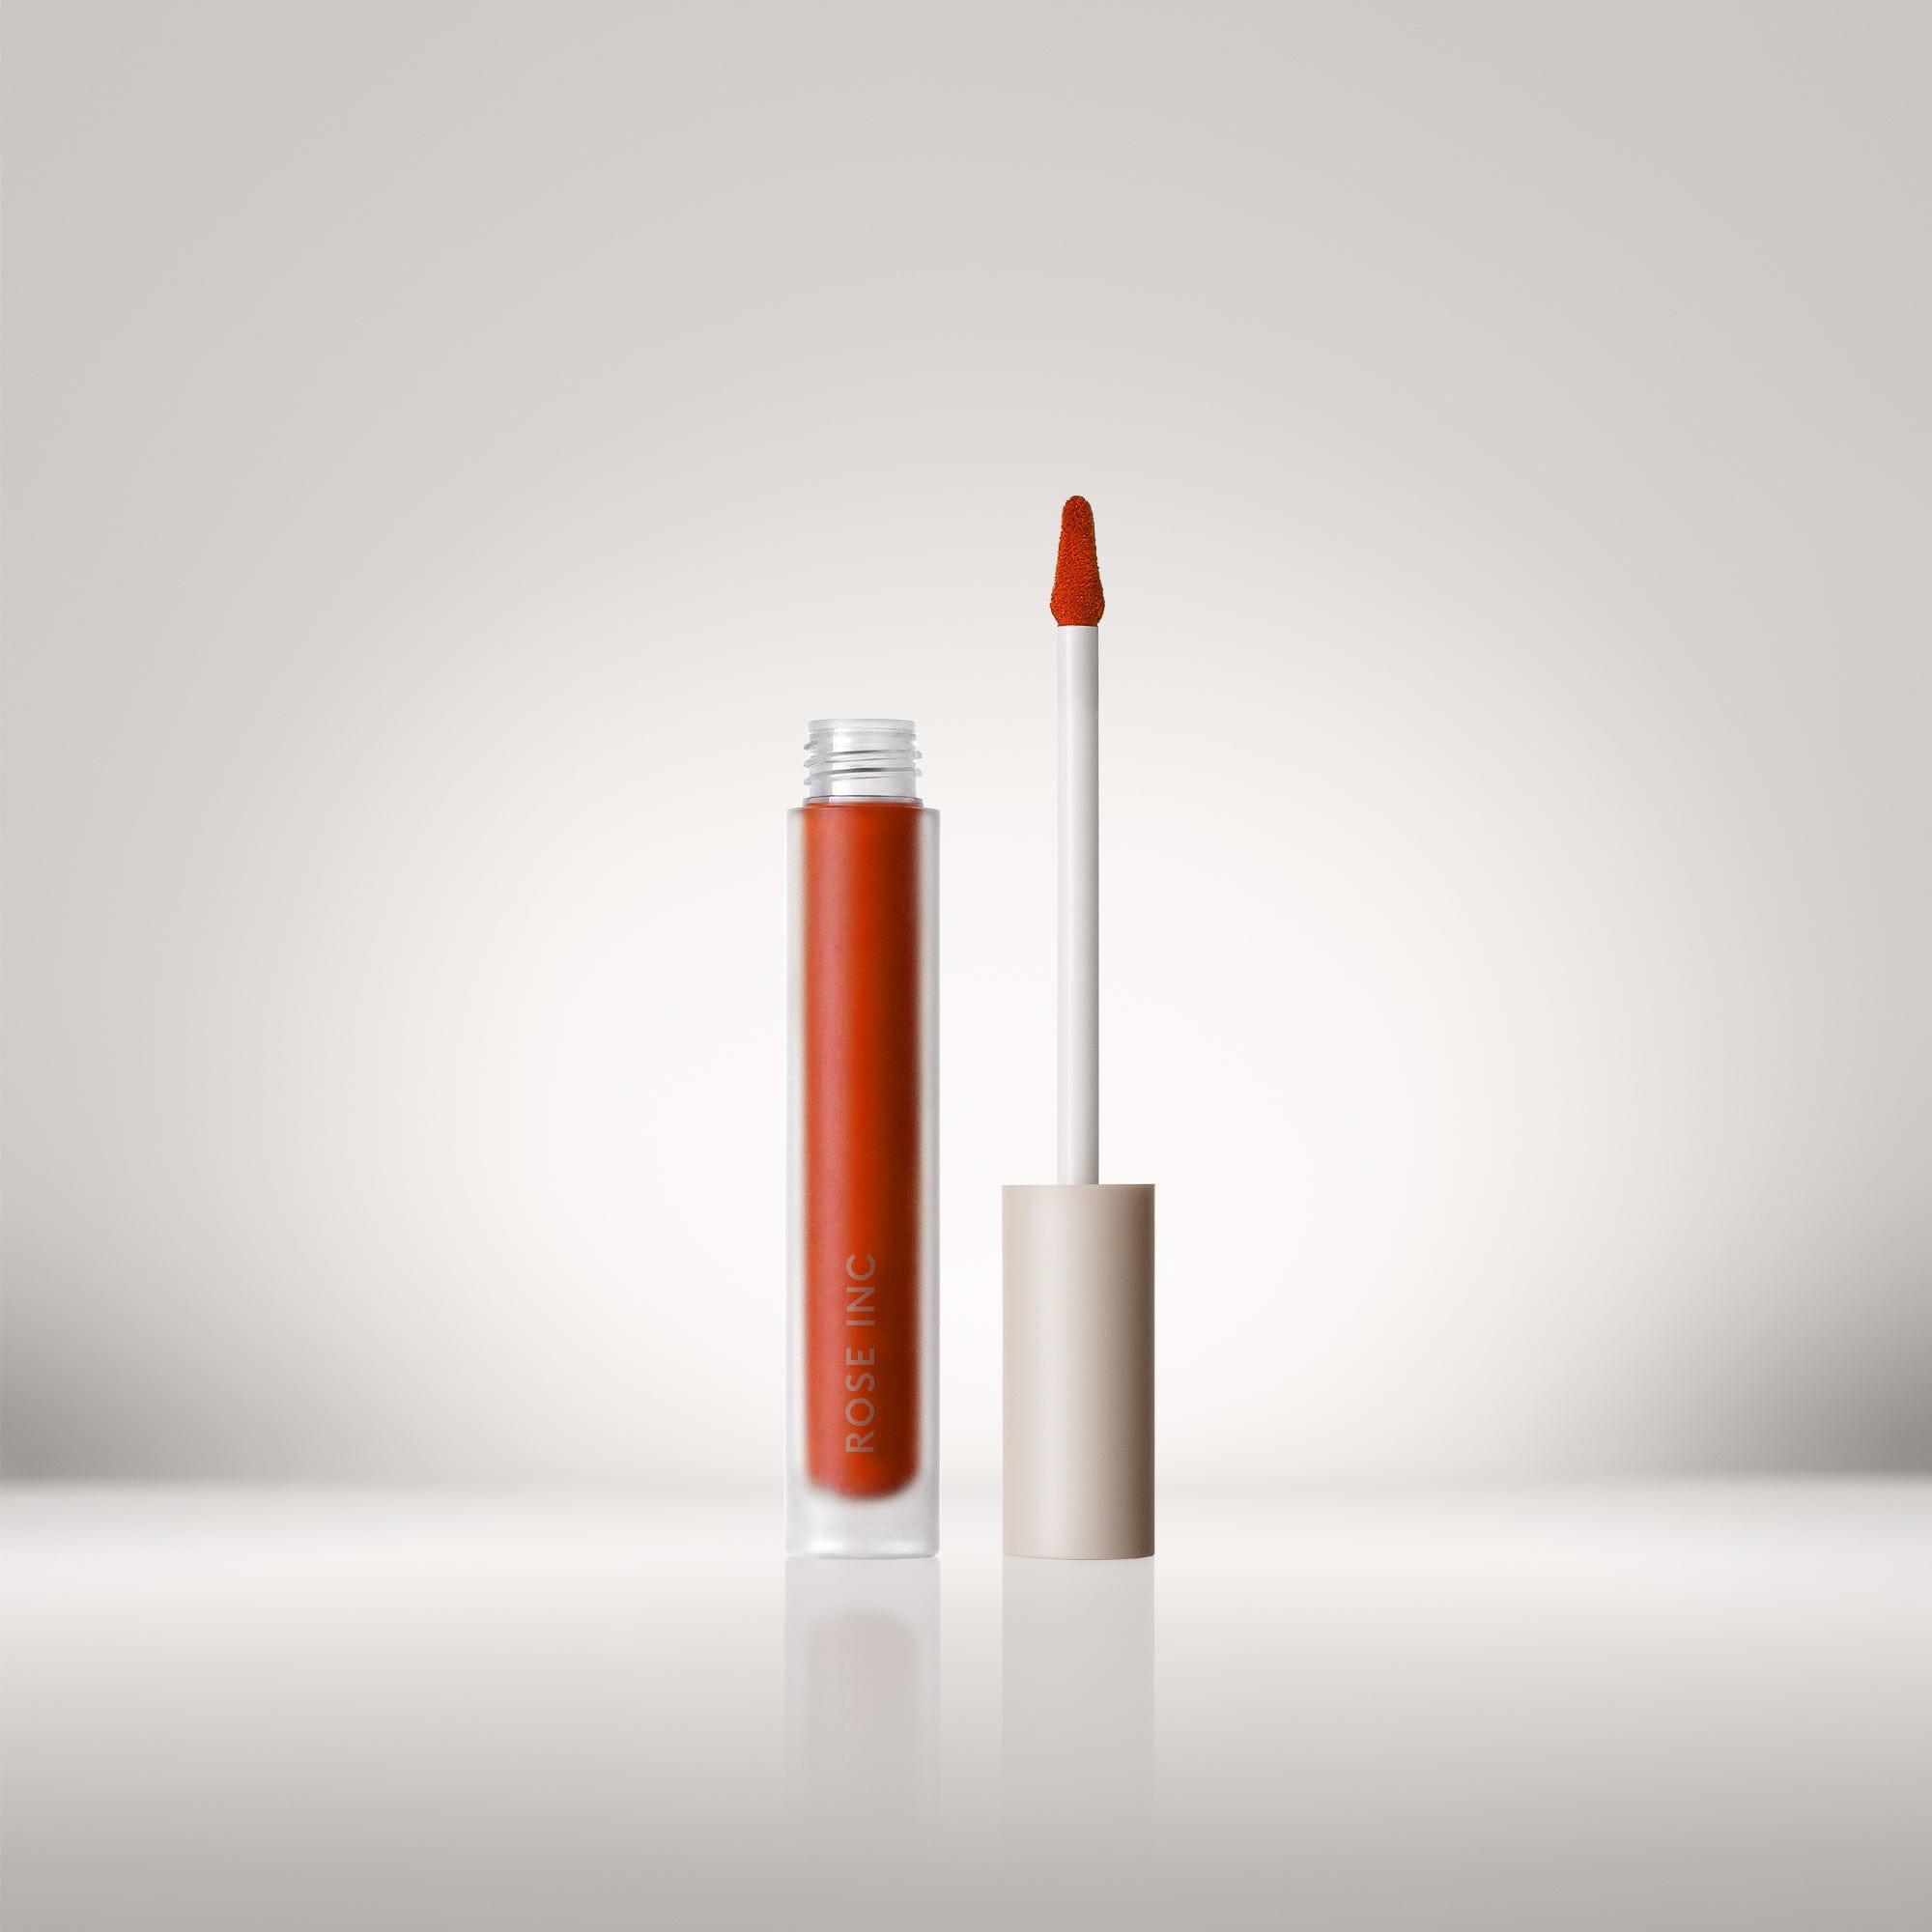 Lip Cream Weightless Matte Color in shade Mortal Flame.